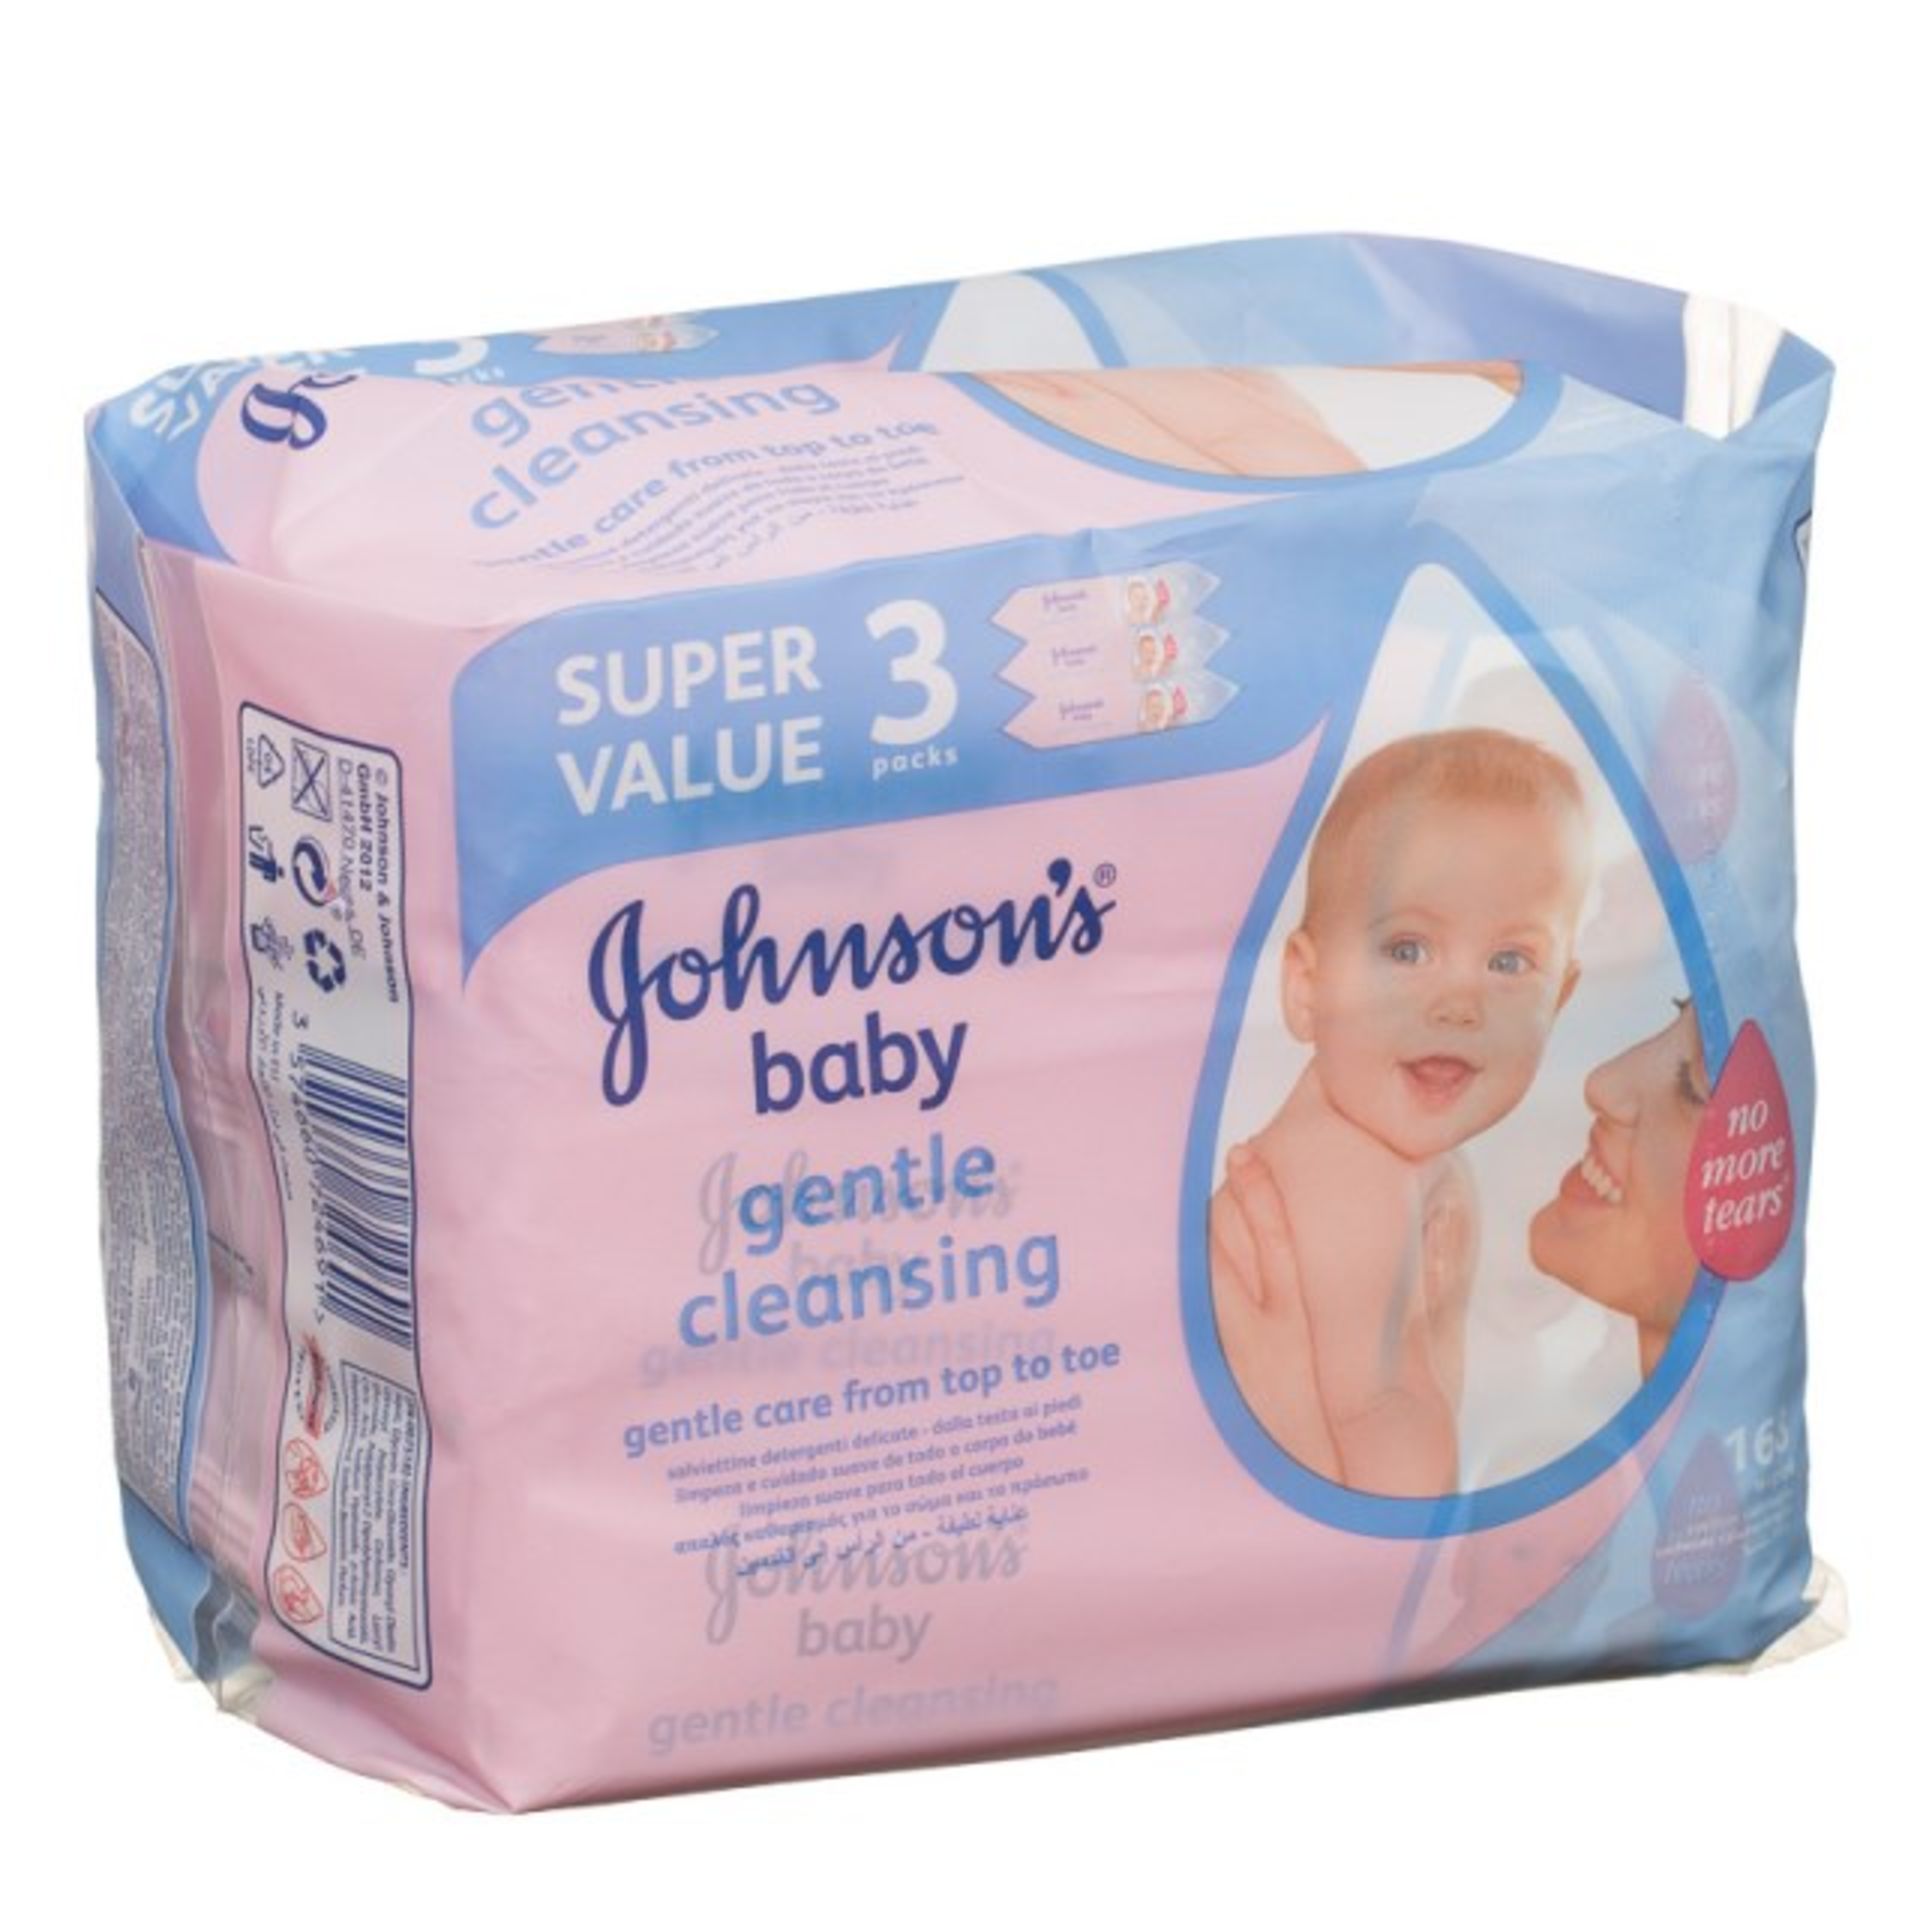 V *TRADE QTY* Brand New 3 Pack Johnsons Baby Gentle Cleansing RRP9.85 X 90 YOUR BID PRICE TO BE